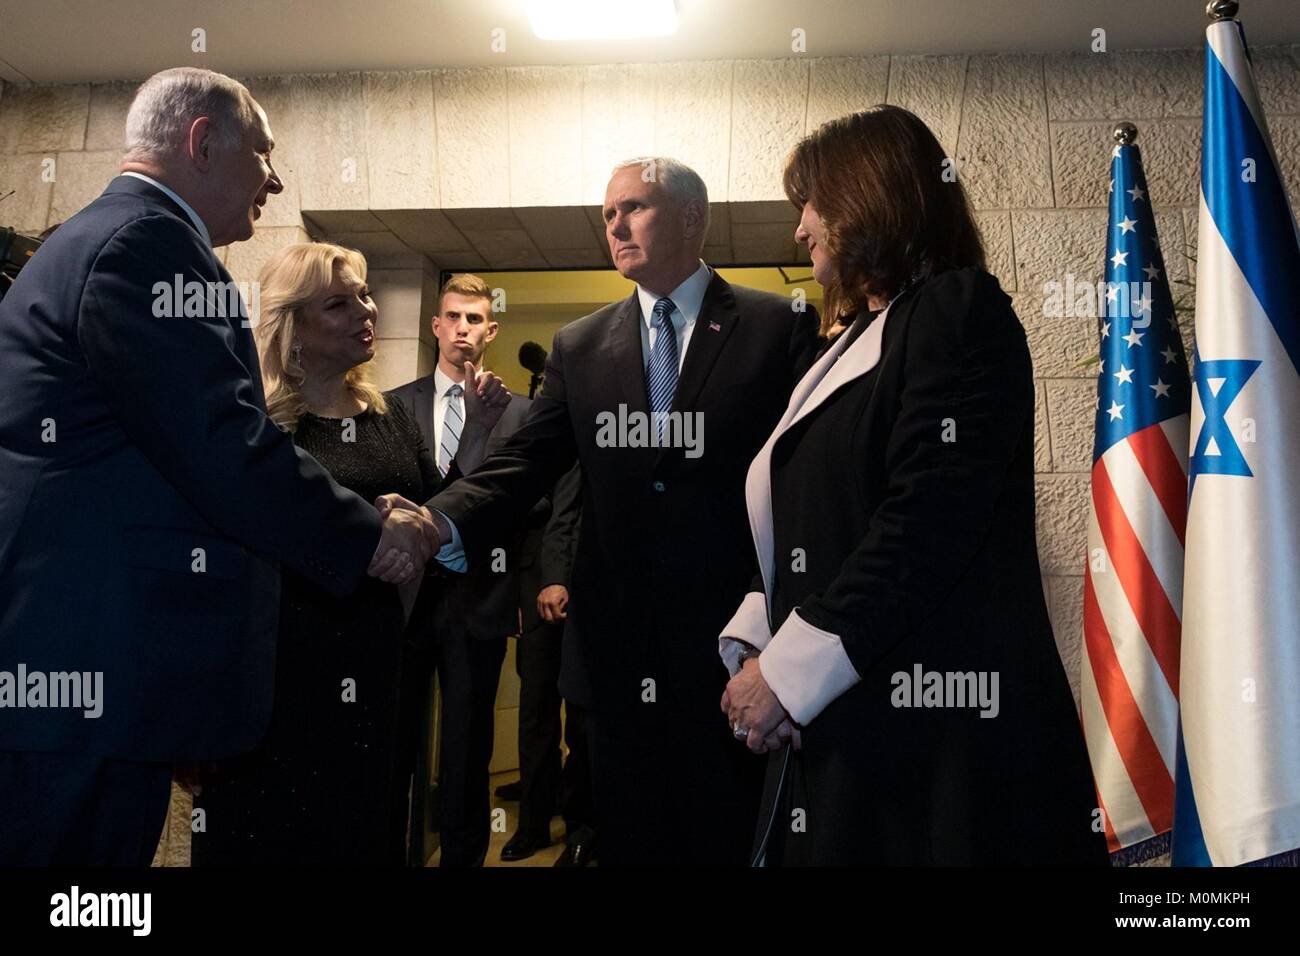 Jerusalem, Israel. 22nd Jan, 2018. U.S. Vice President Mike Pence, right, and wife Karen Pence, are welcomed for a private dinner hosted by Israeli Prime Minister Benjamin Netanyahu and wife Sara, left, at the Prime Ministers residence January 22, 2018 in Jerusalem, Israel. Credit: Planetpix/Alamy Live News Stock Photo